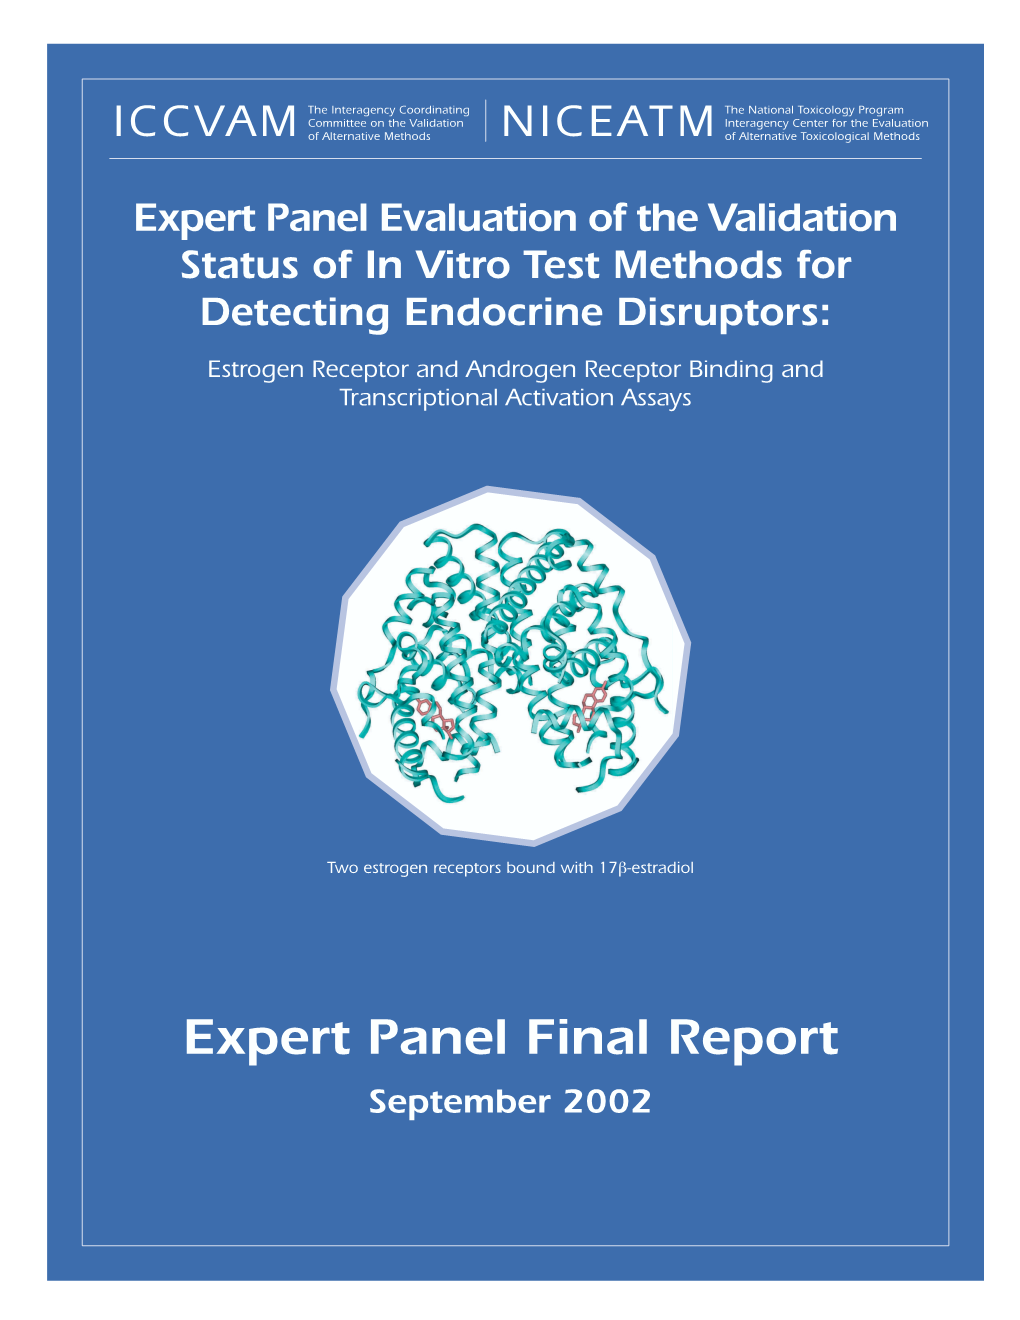 Expert Panel Evaluation of the Validation Status of in Vitro Test